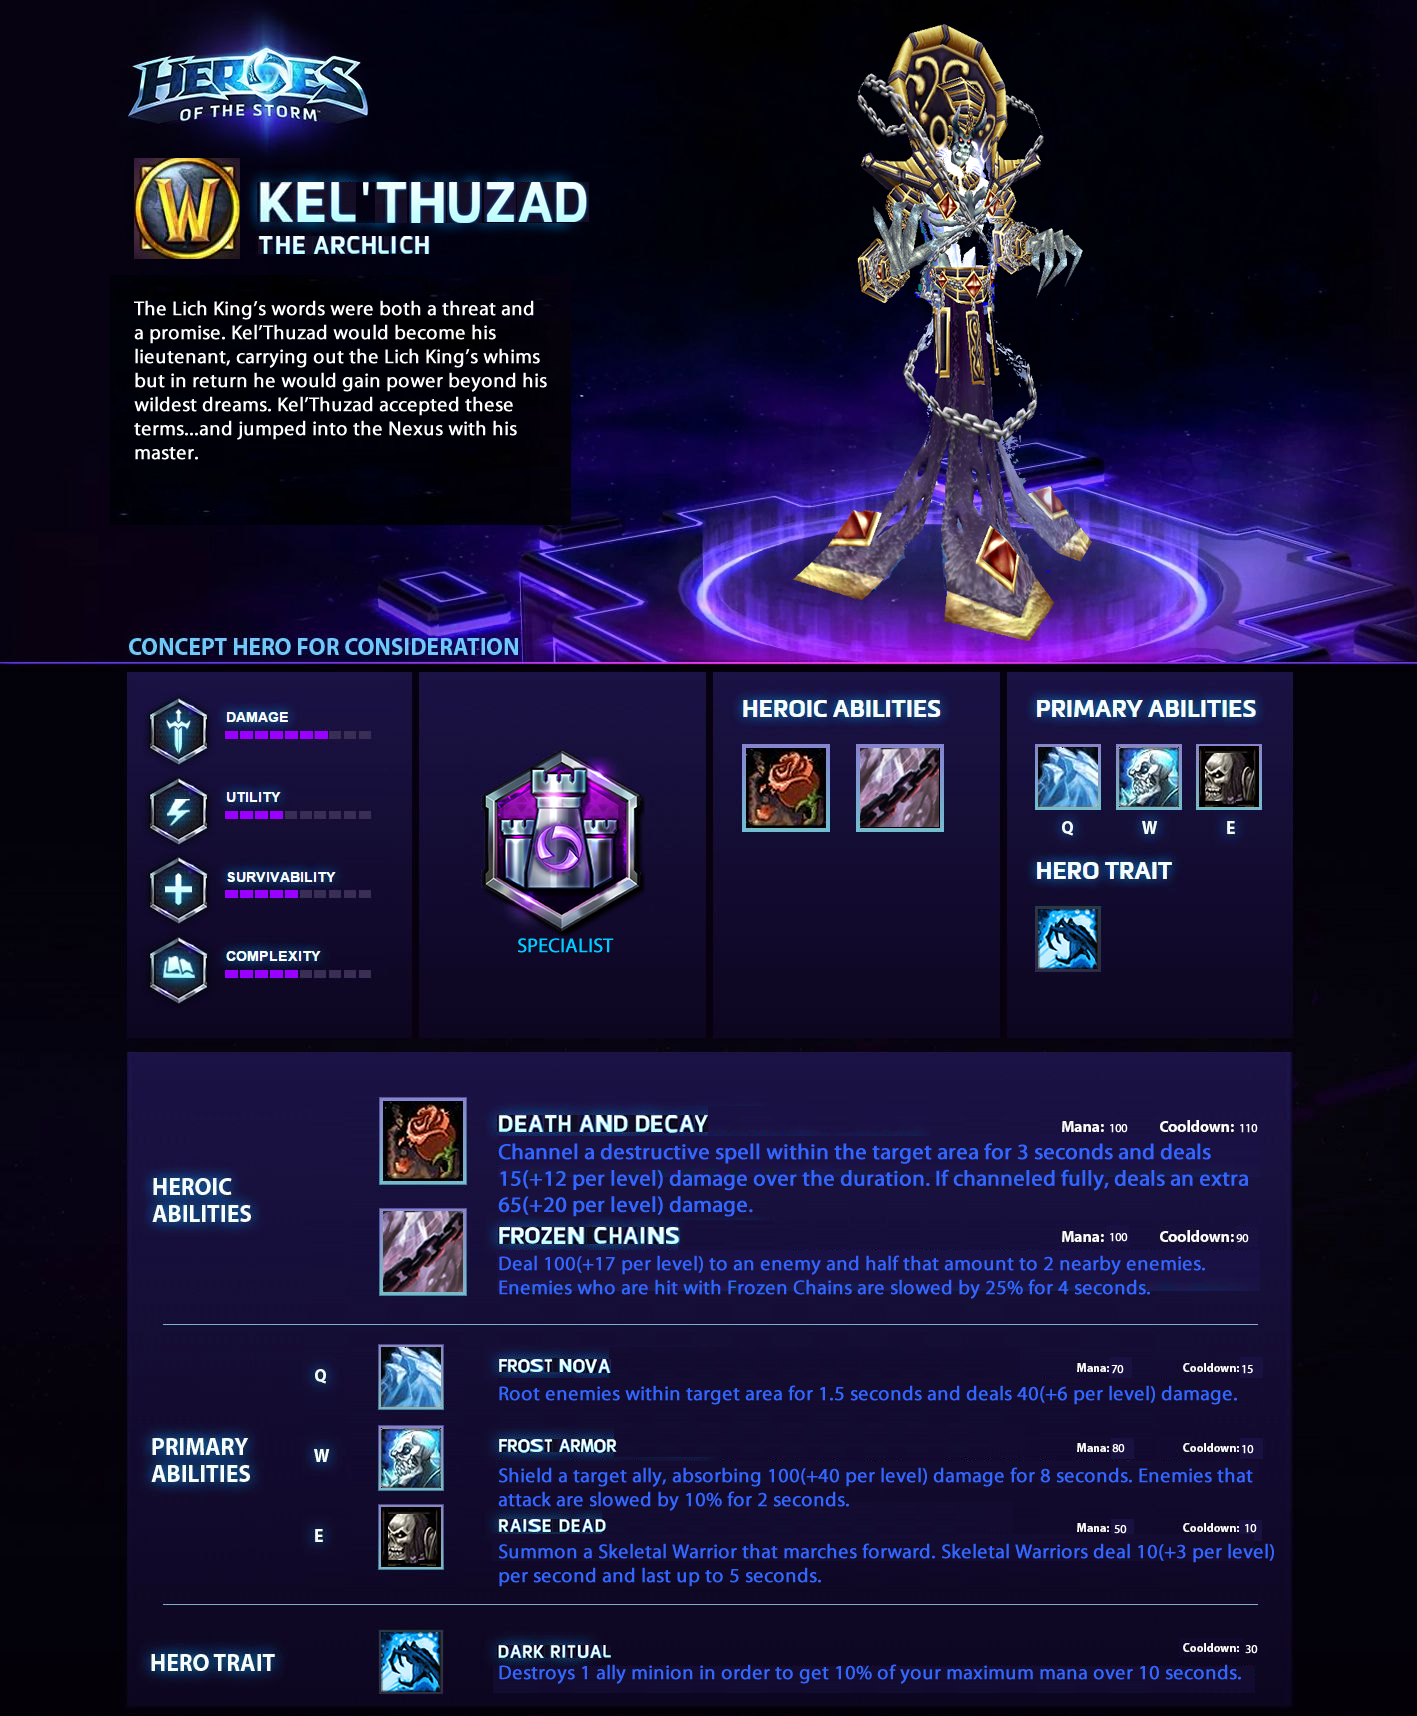 A new Heroes of the Storm patch? What year is it?